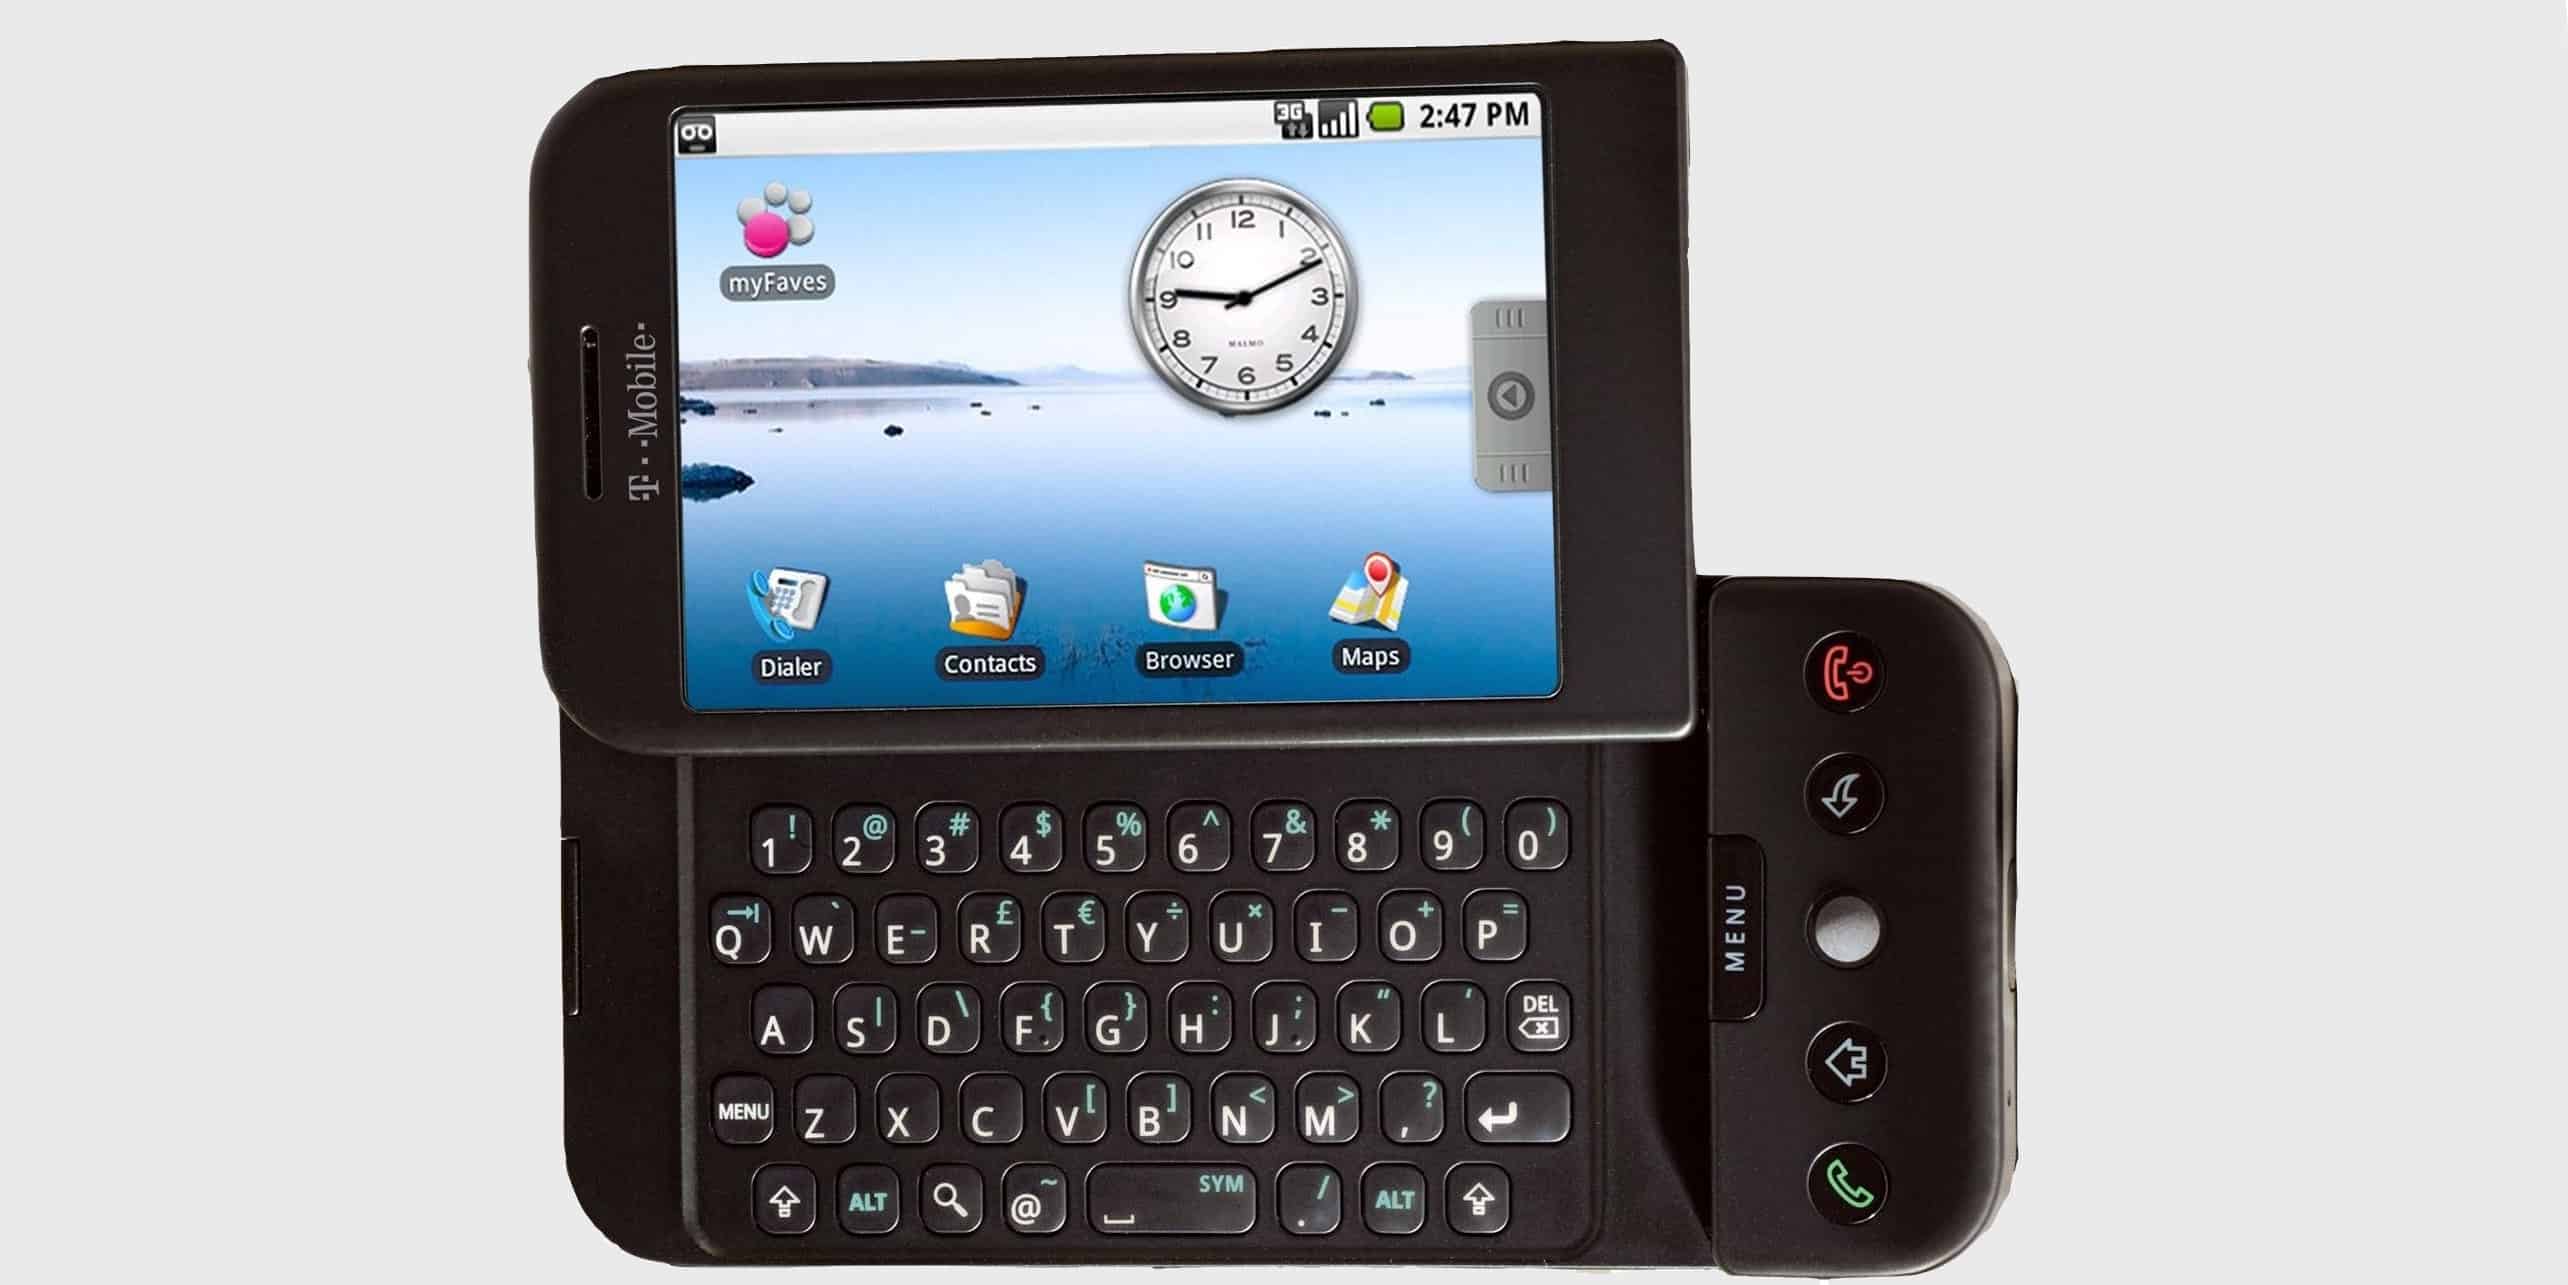 HTC Dream was the first Android phone.